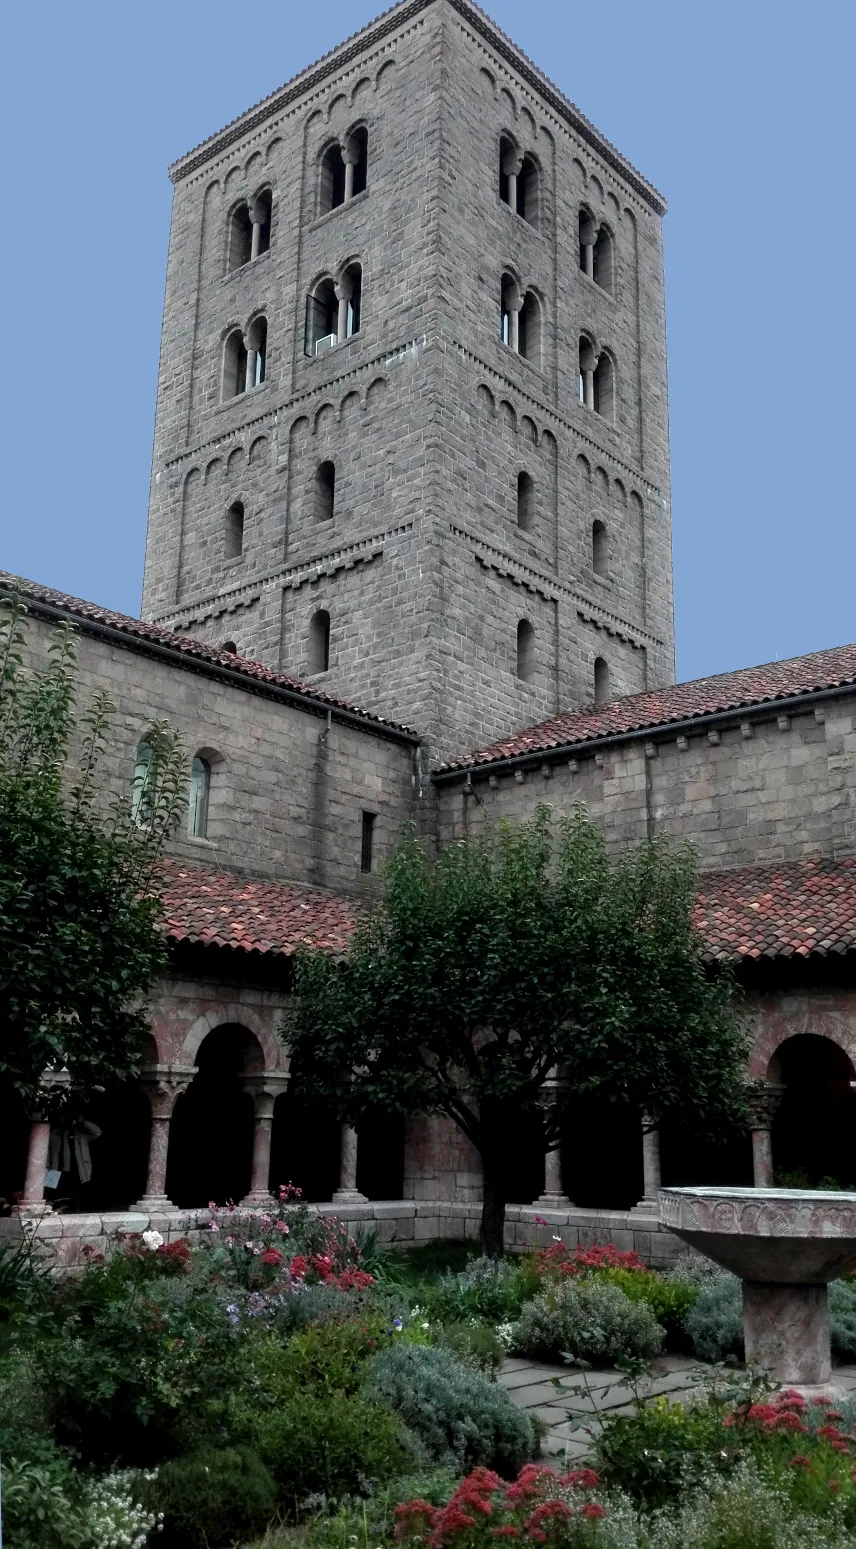 Picture of courtyard, cloisters, and tower of The Cloisters, NYC